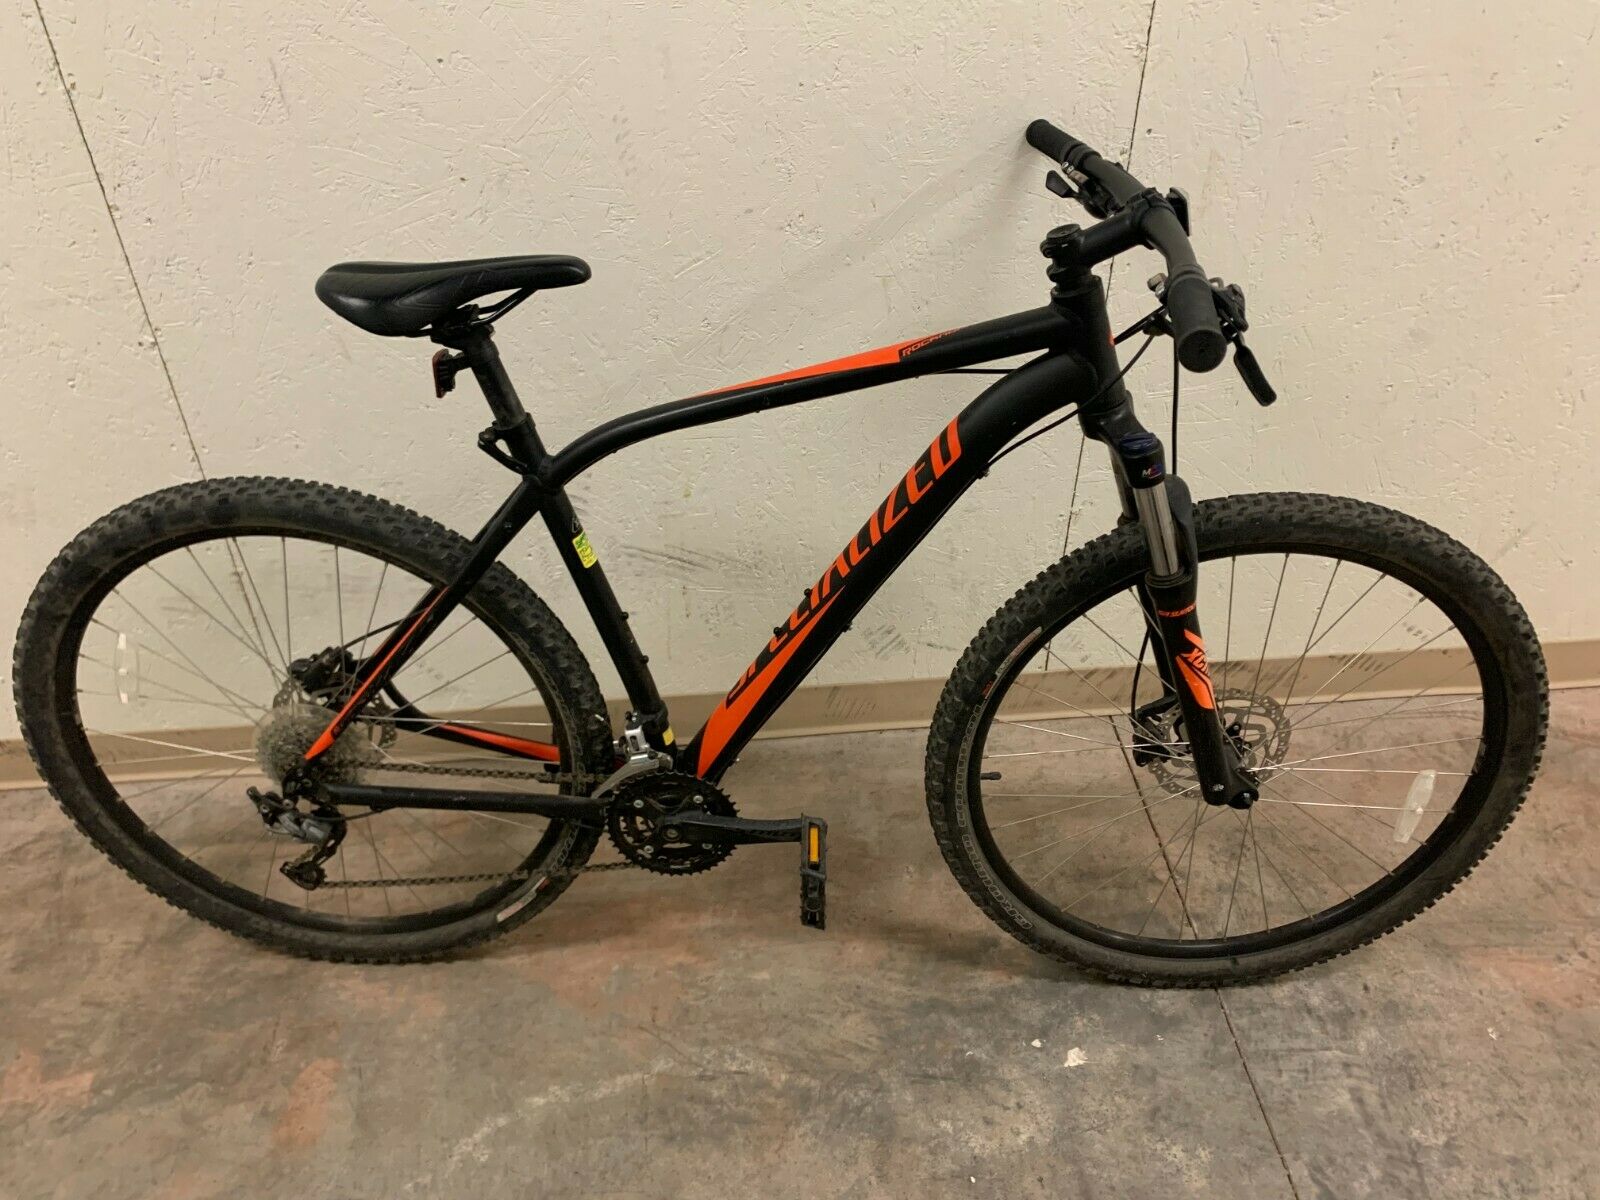 Specialized Rockhopper mountain bike, XL, black/red, in great condition